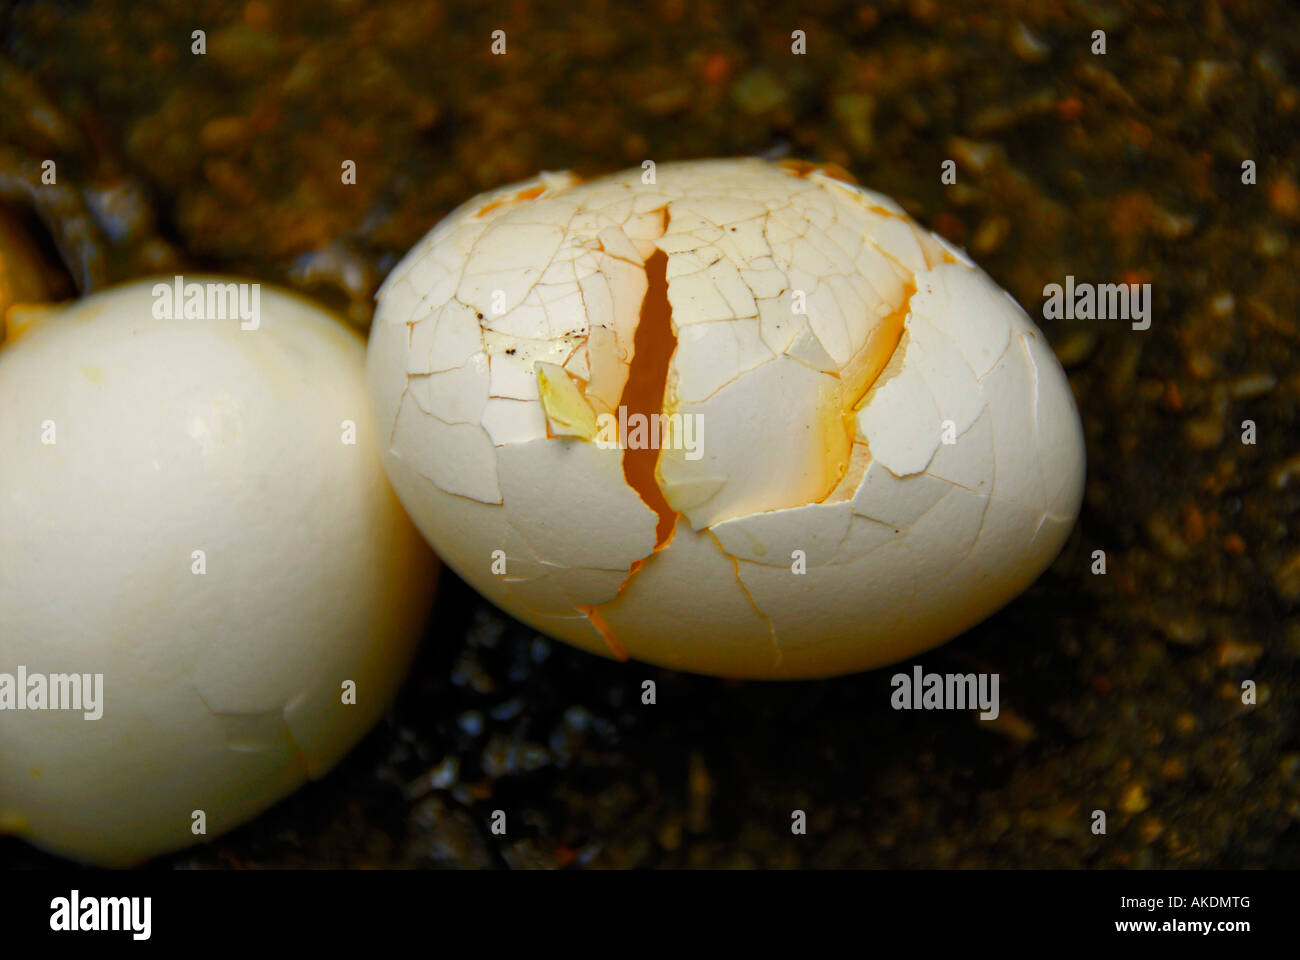 1,093 Rotting Egg Images, Stock Photos, 3D objects, & Vectors